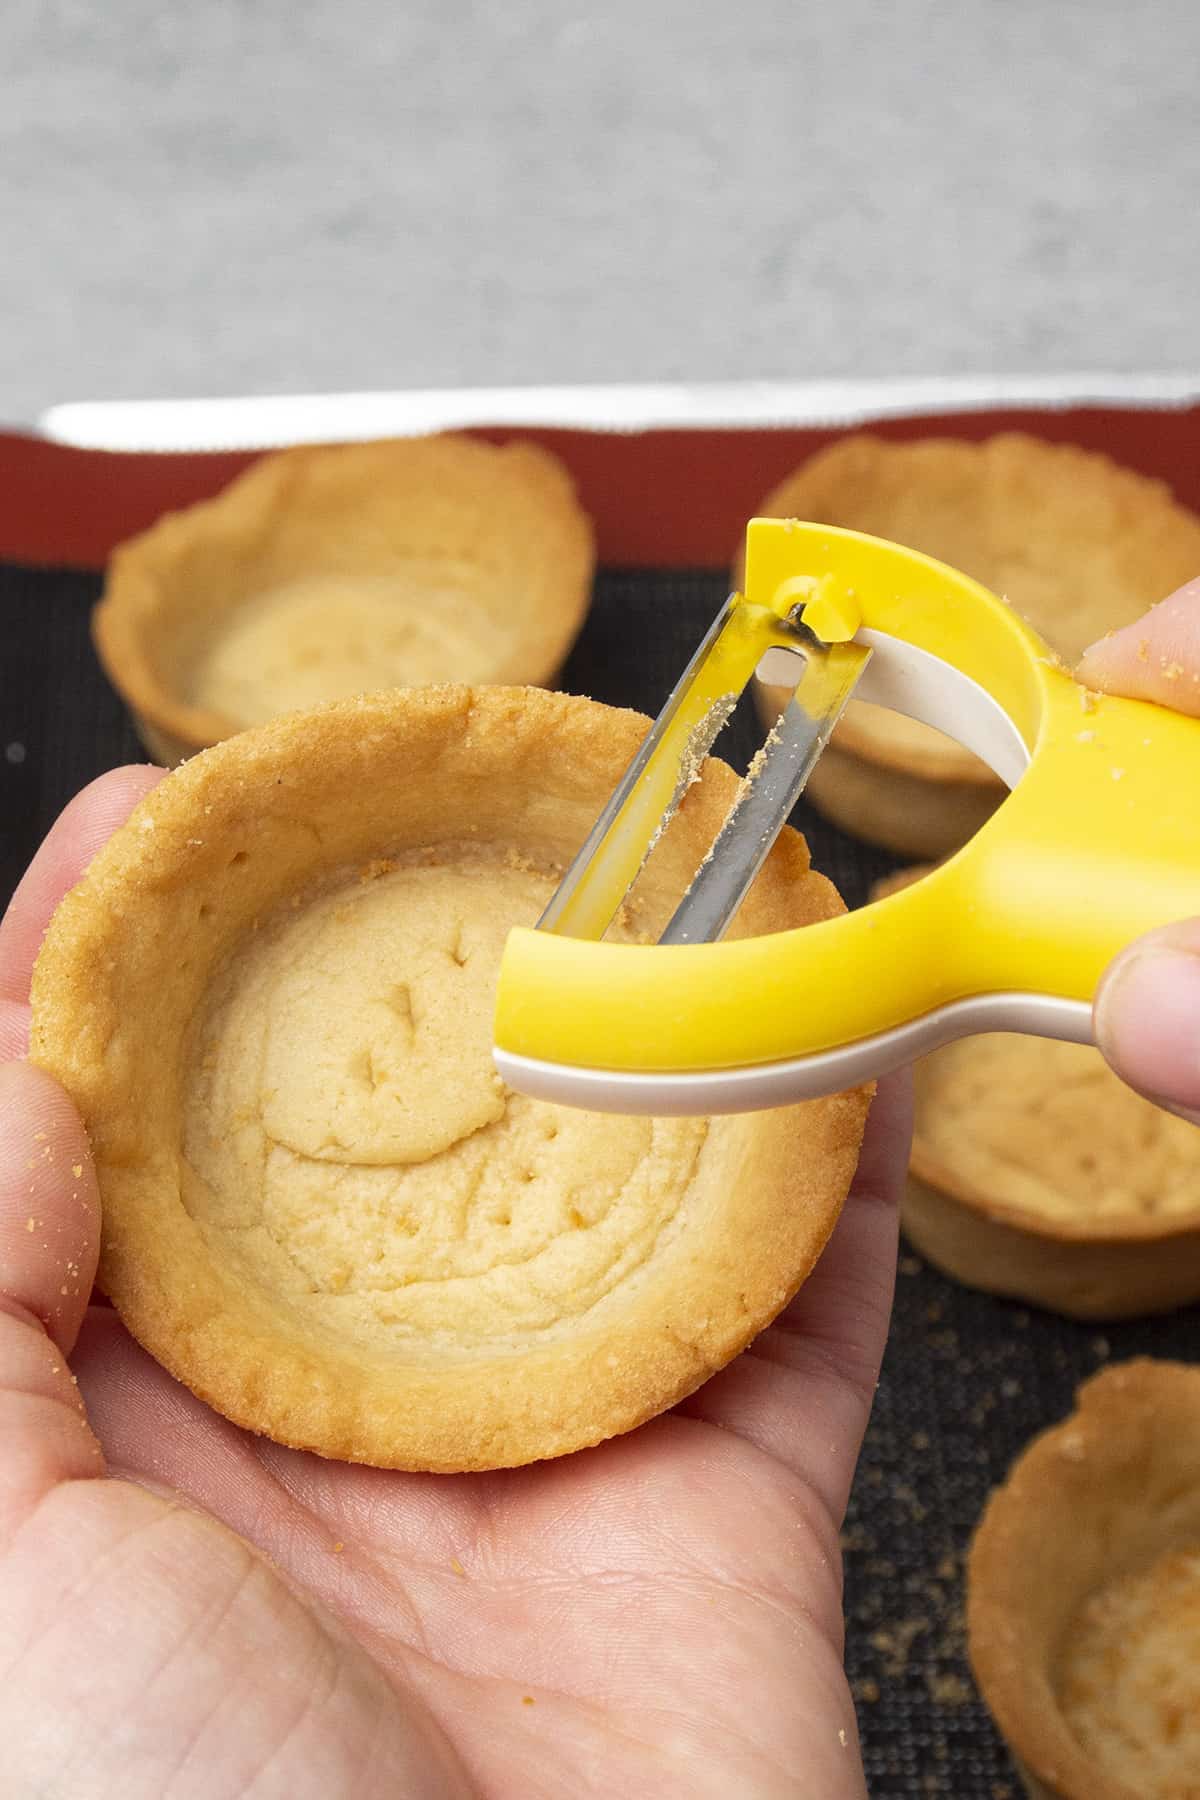 A hand holding a tart shell and sharpening the edge of the tart with a potato peeler